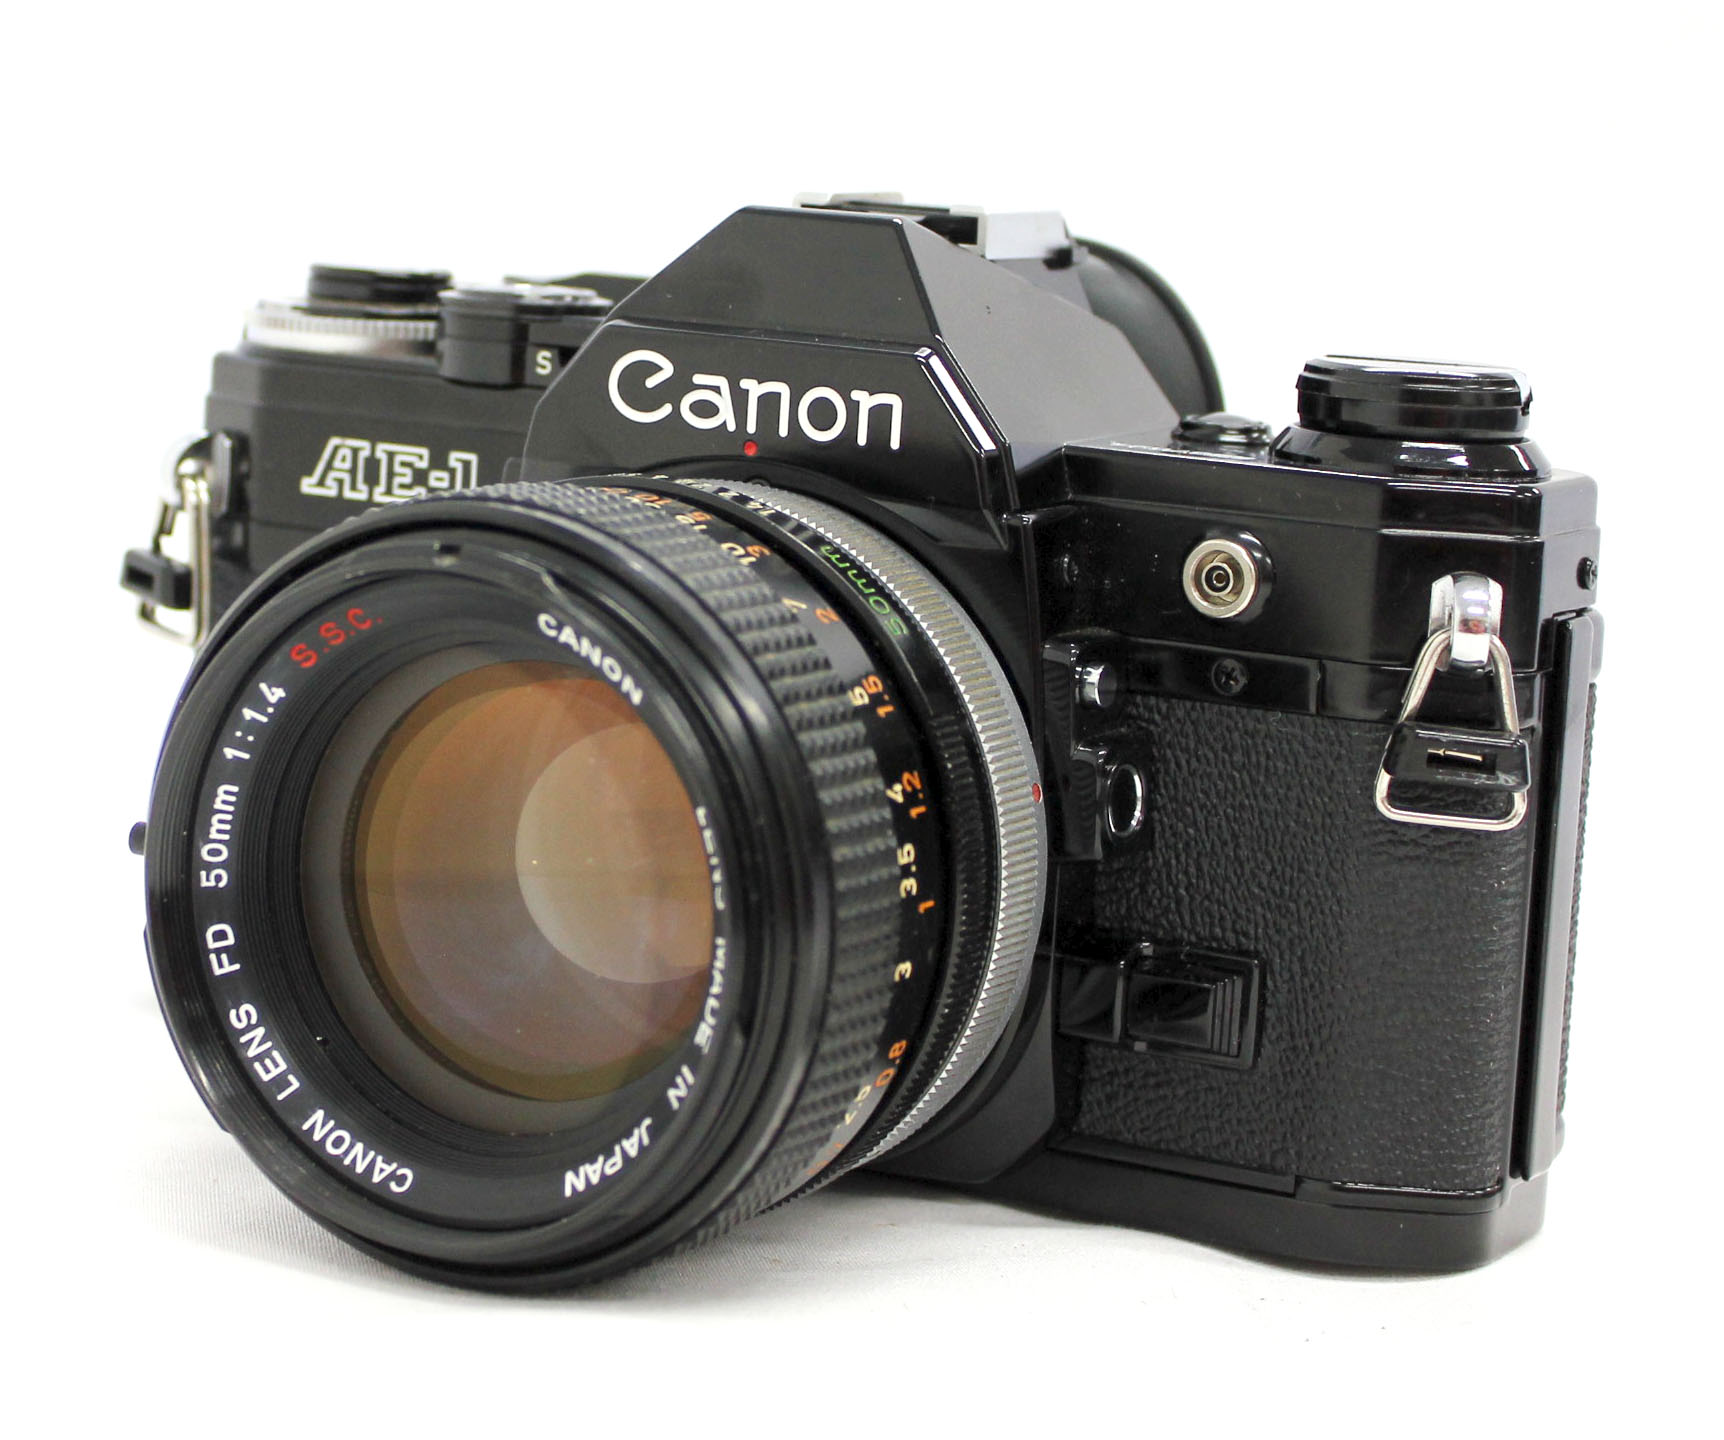 Canon AE-1 35mm SLR Camera Black with FD 50mm F/1.4 S.S.C. Lens from Japan